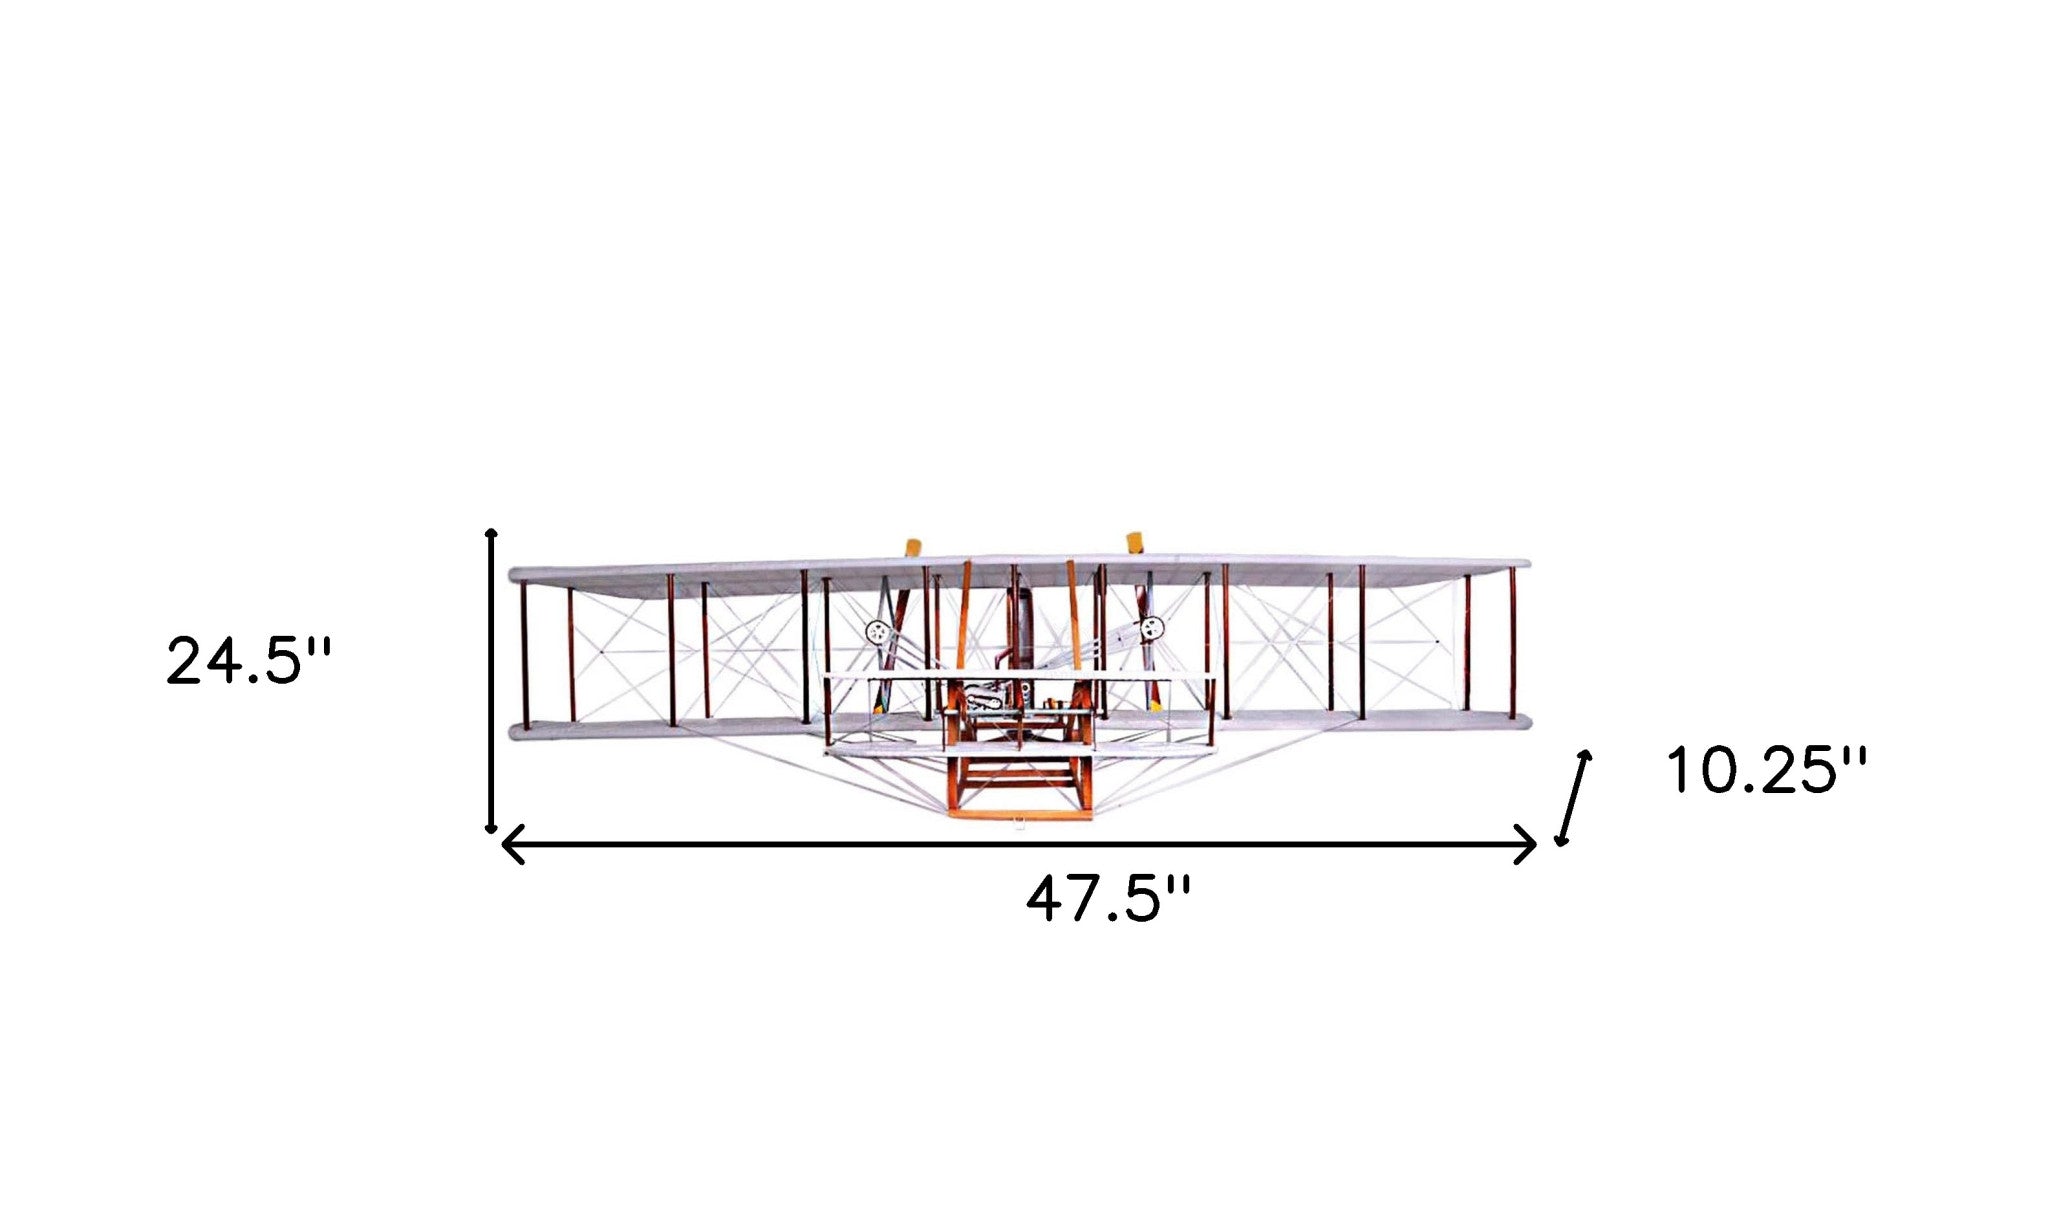 c1903 Wright Brothers Flyer Model Sculpture